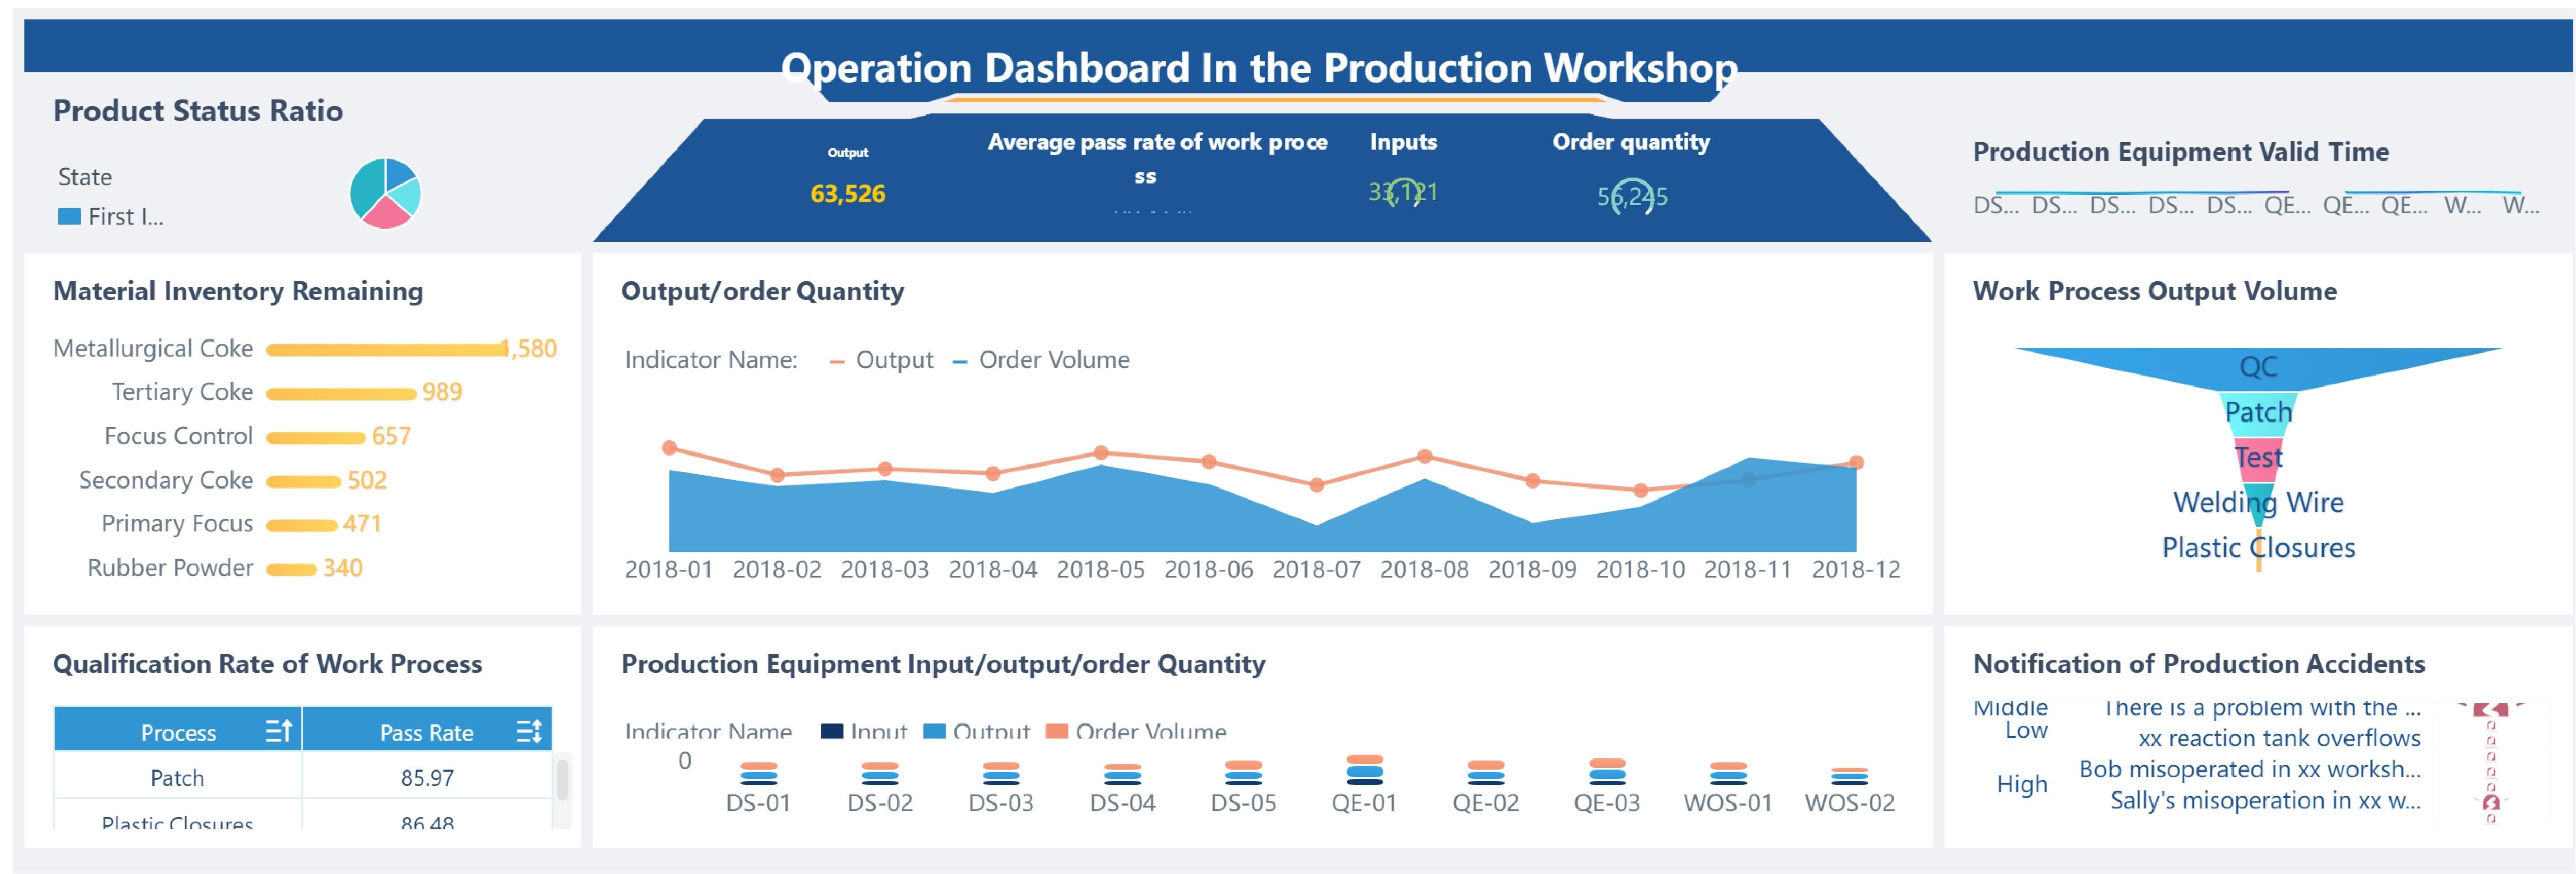 Operation_Dashboard_In_the_Production_Workshop_page-0001.jpg